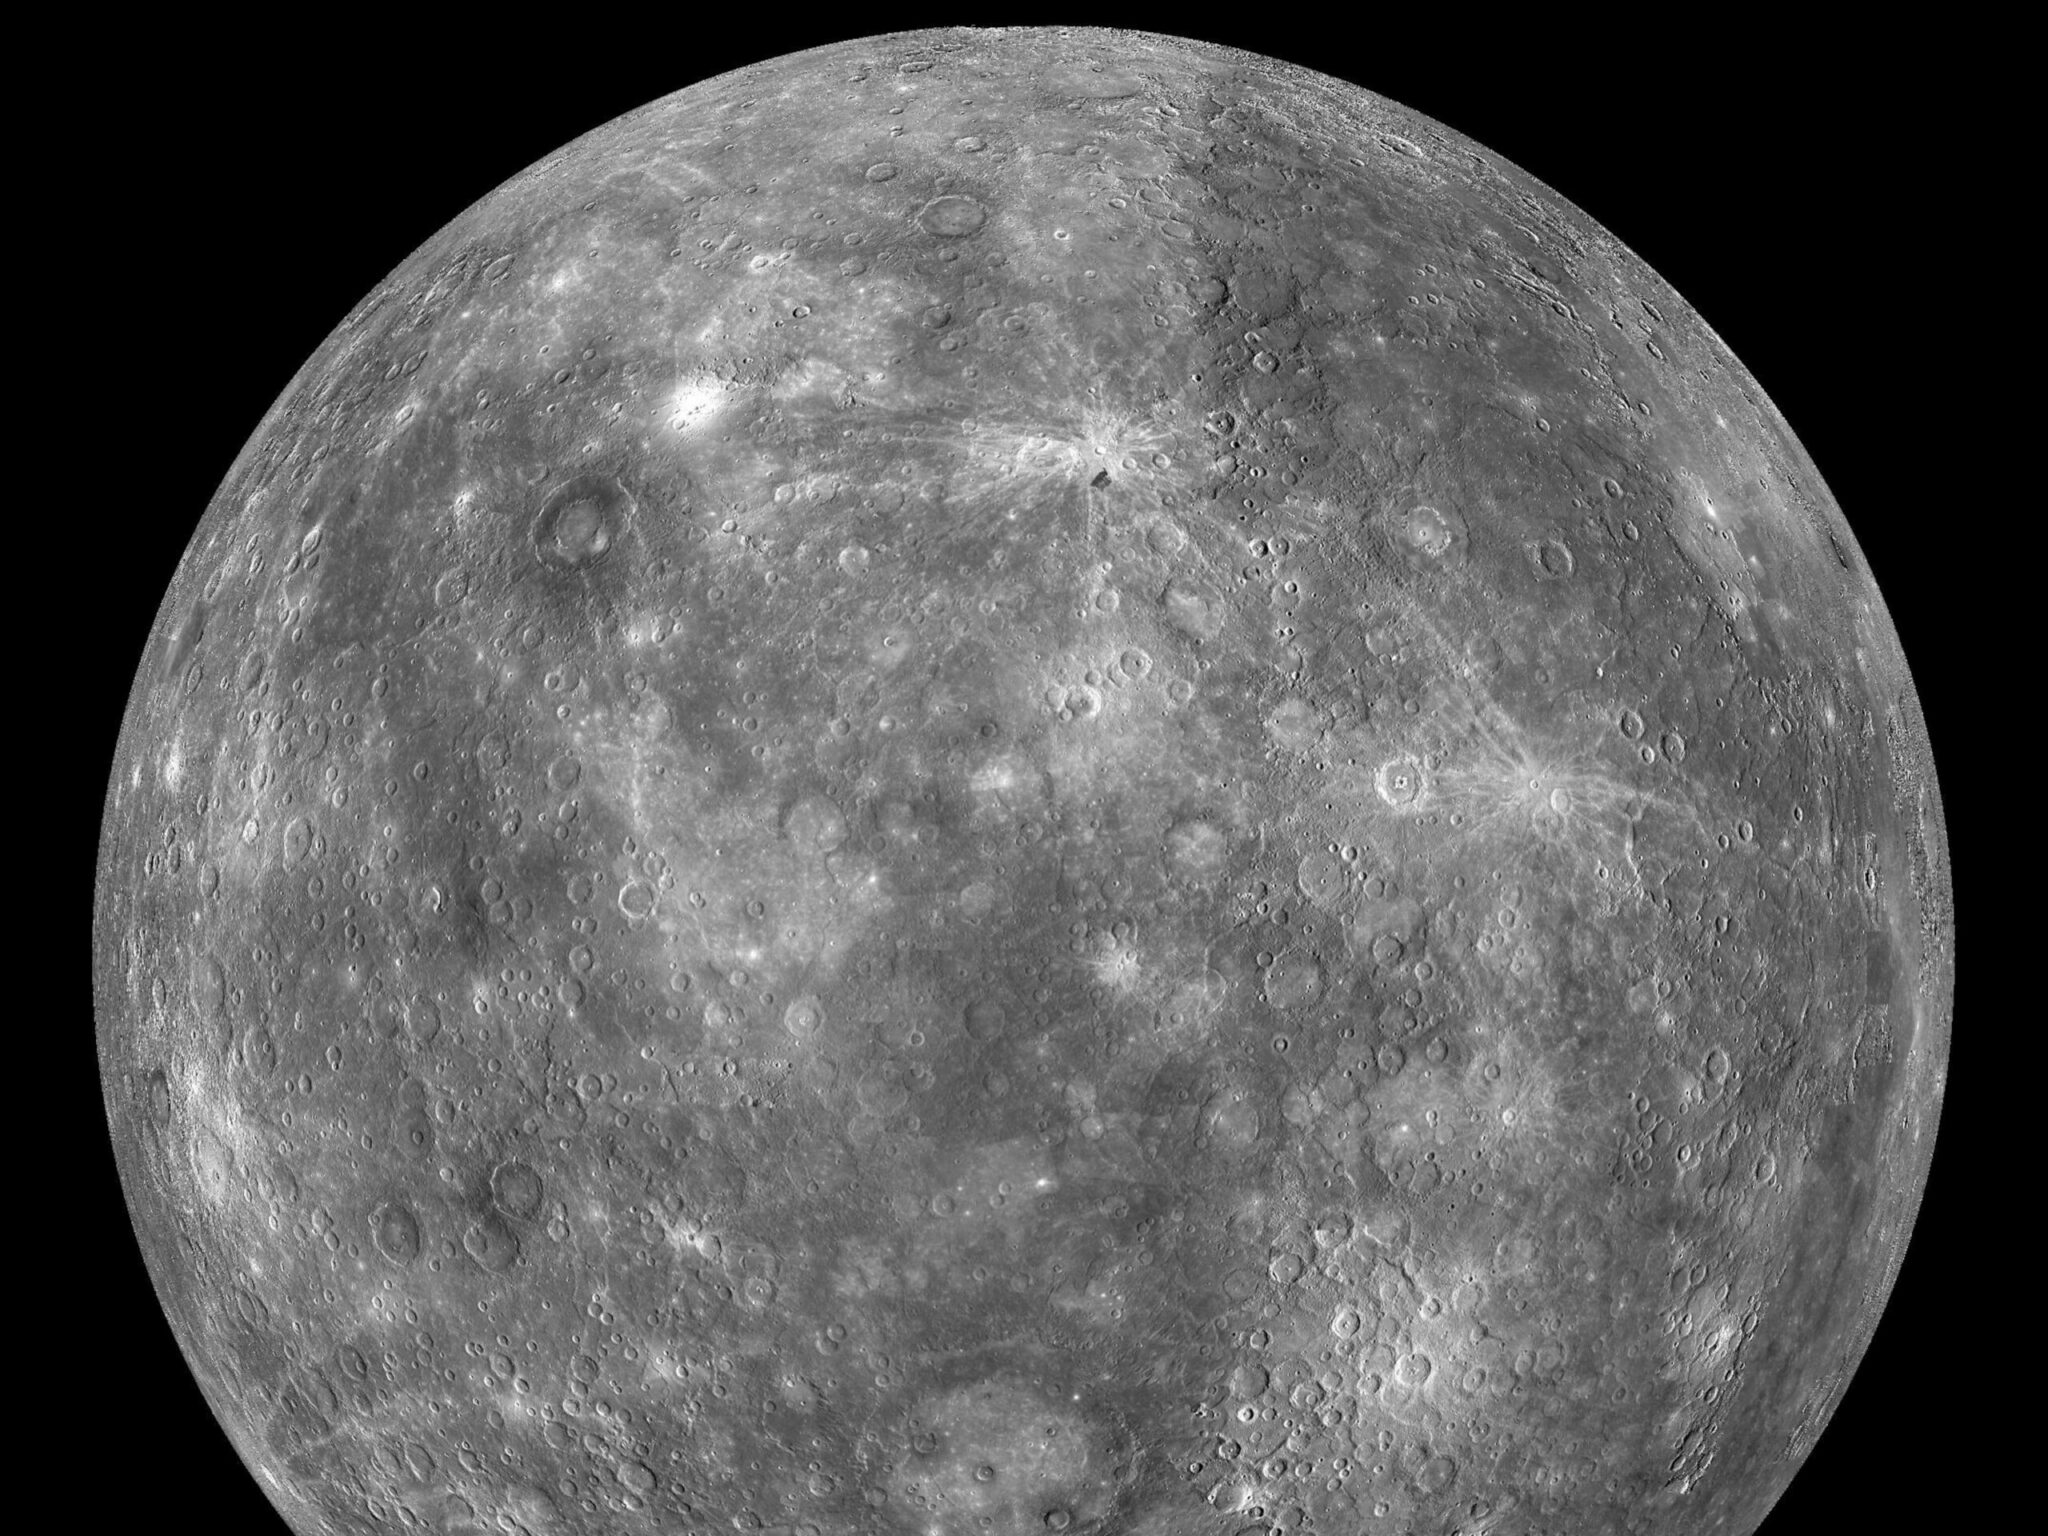 what is the largest crater photographed on the planet mercury and who was the crater named after scaled